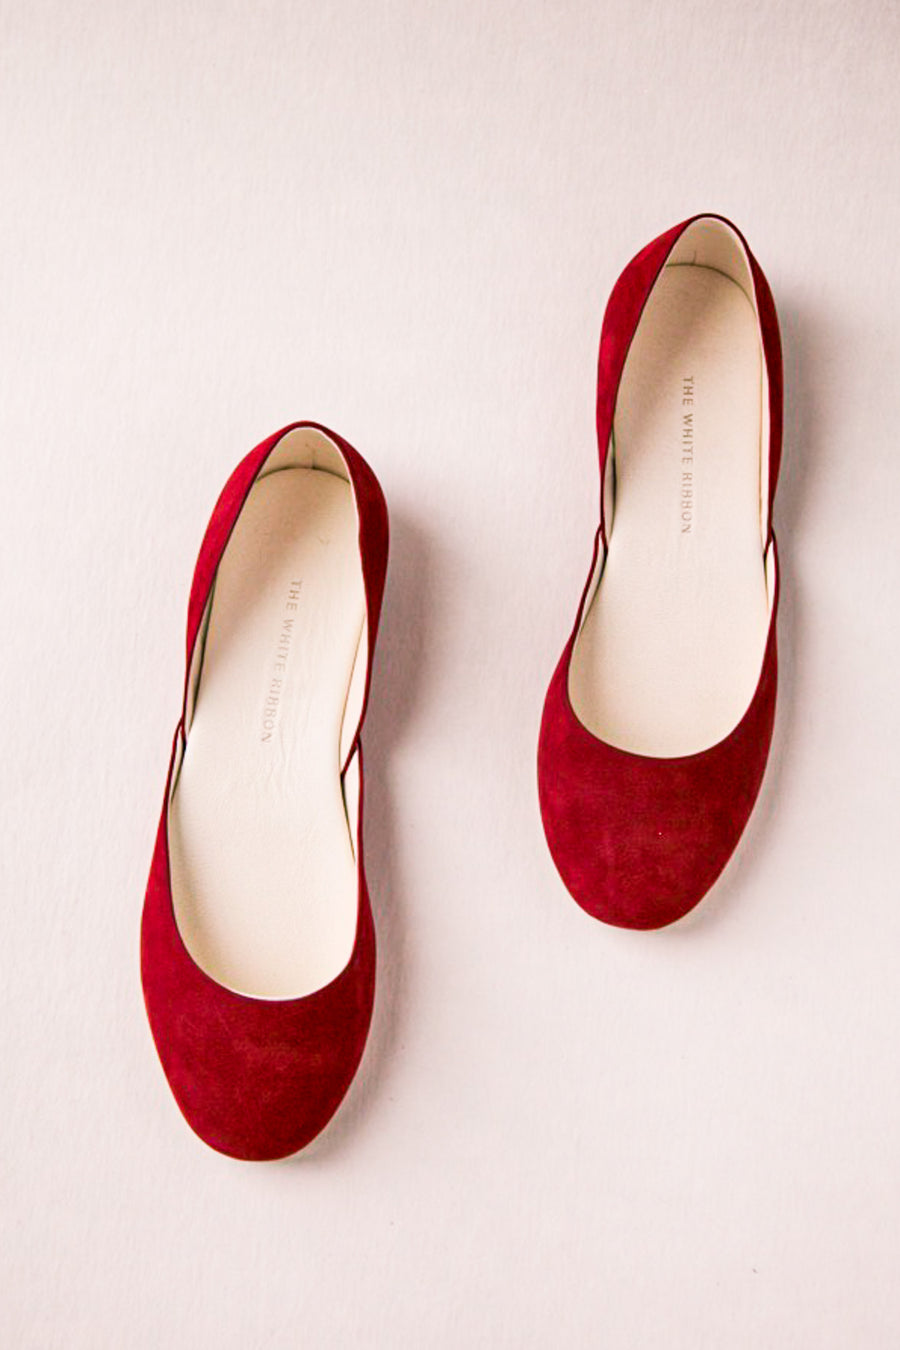 THEA BALLET FLATS - RUBY RED NUBUCK